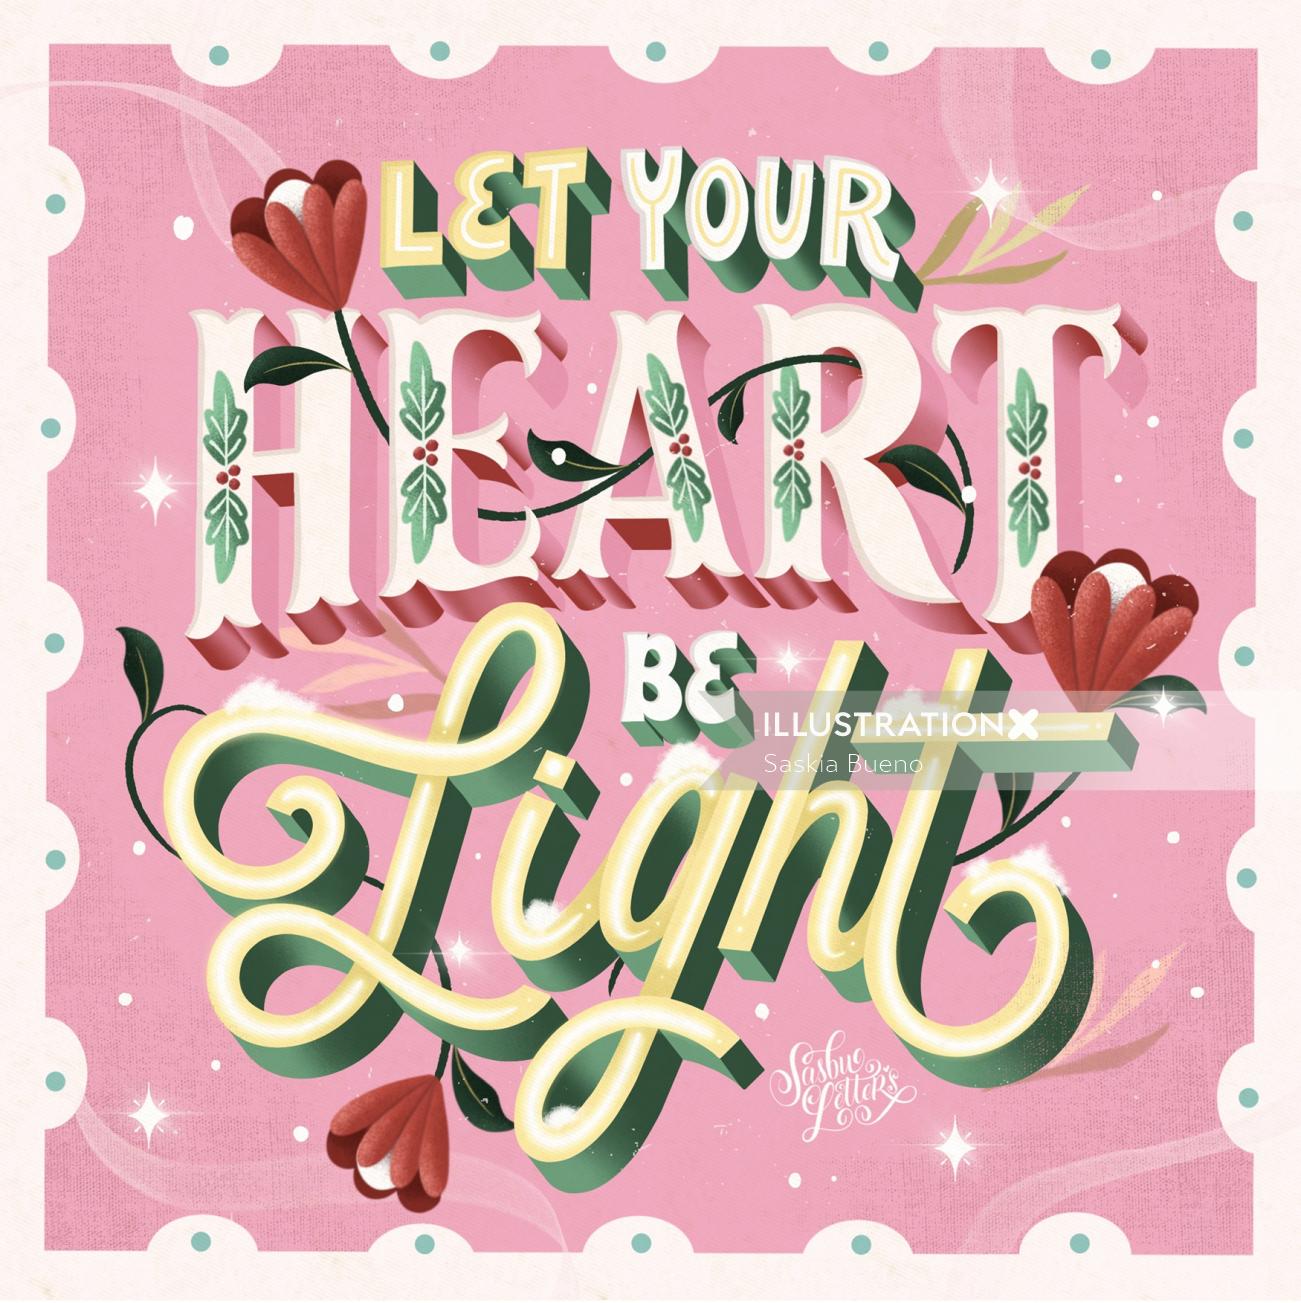 Lettering Let Your Heart Be Light